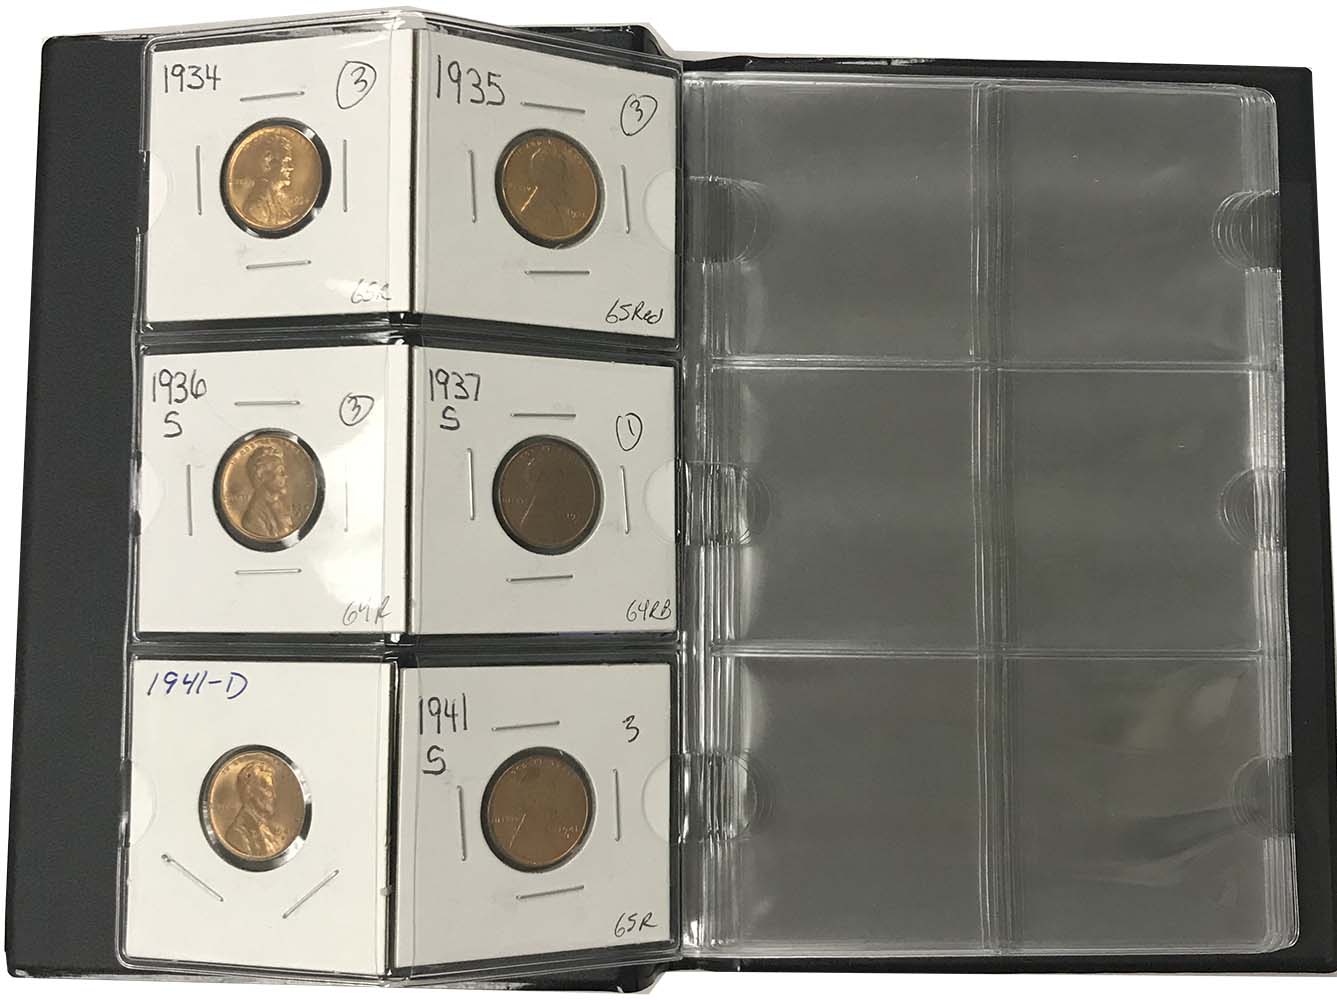 NEW 60-Pocket RED Coin Collection Storage Album 2"x2" Mylar Flips Coin Holders 